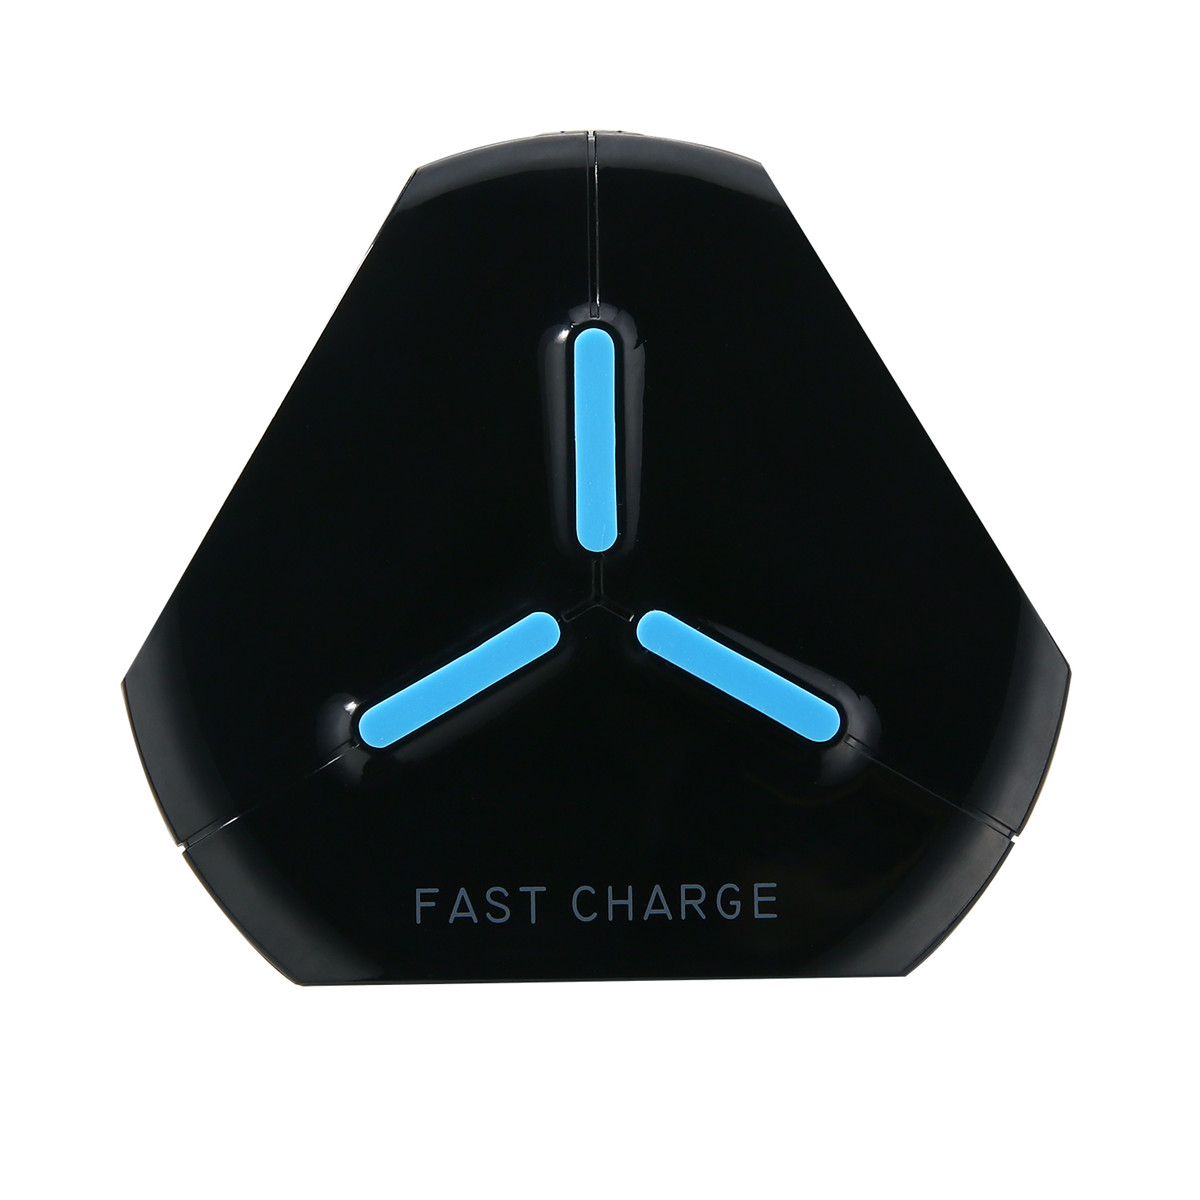 Q500-Qi-Wireless-Fast-Charging-Phone-Charger-Pad-with-LED-Indicator-for-Samsung-S8-iPhone-8-X-1207492-5